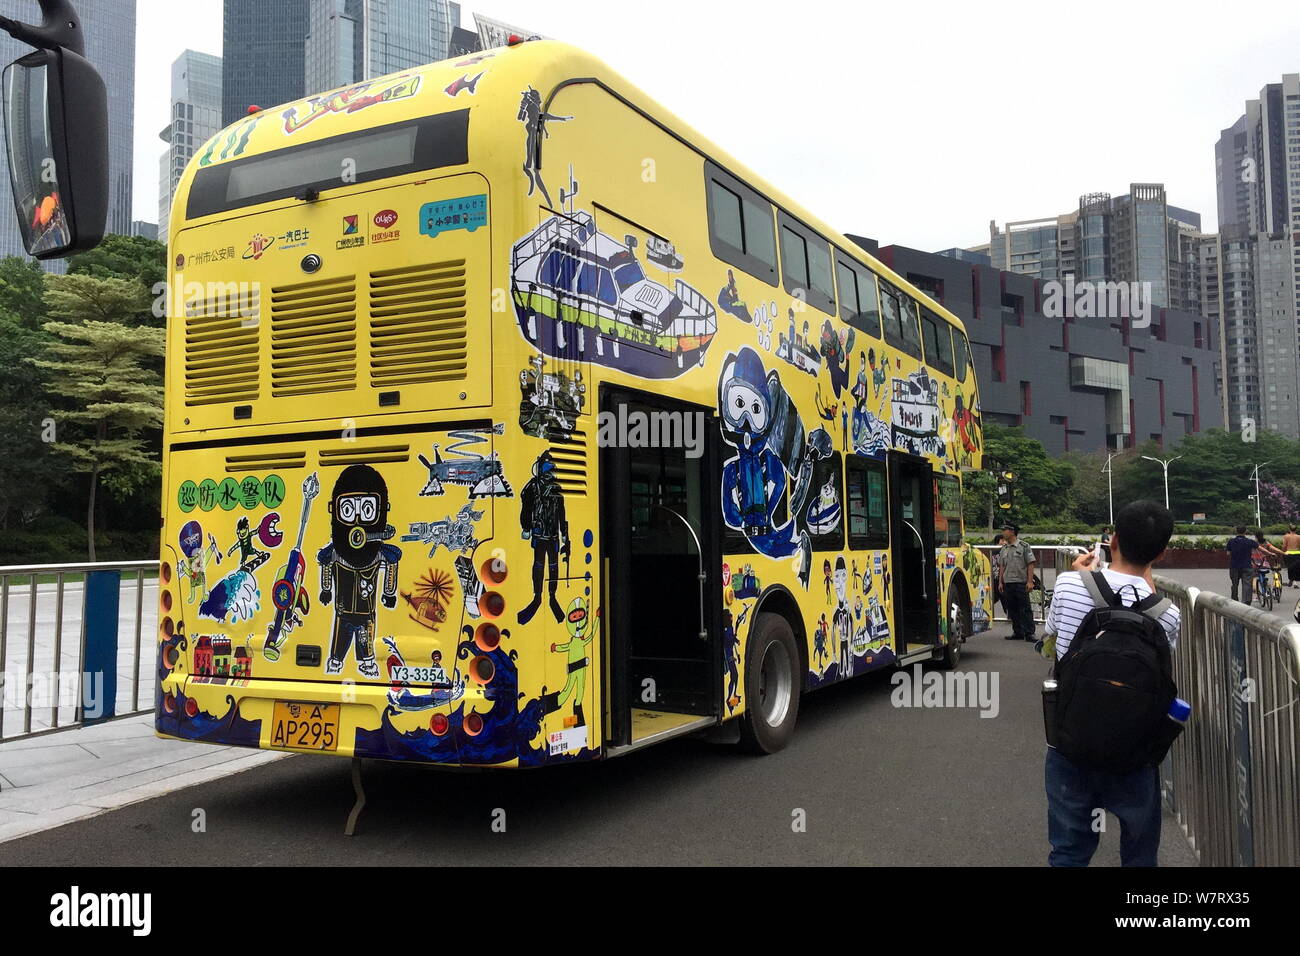 A local takes photos of a police-themed bus painted by 75 children ahead of the International Children's Day in Guangzhou city, south China's Guangdon Stock Photo